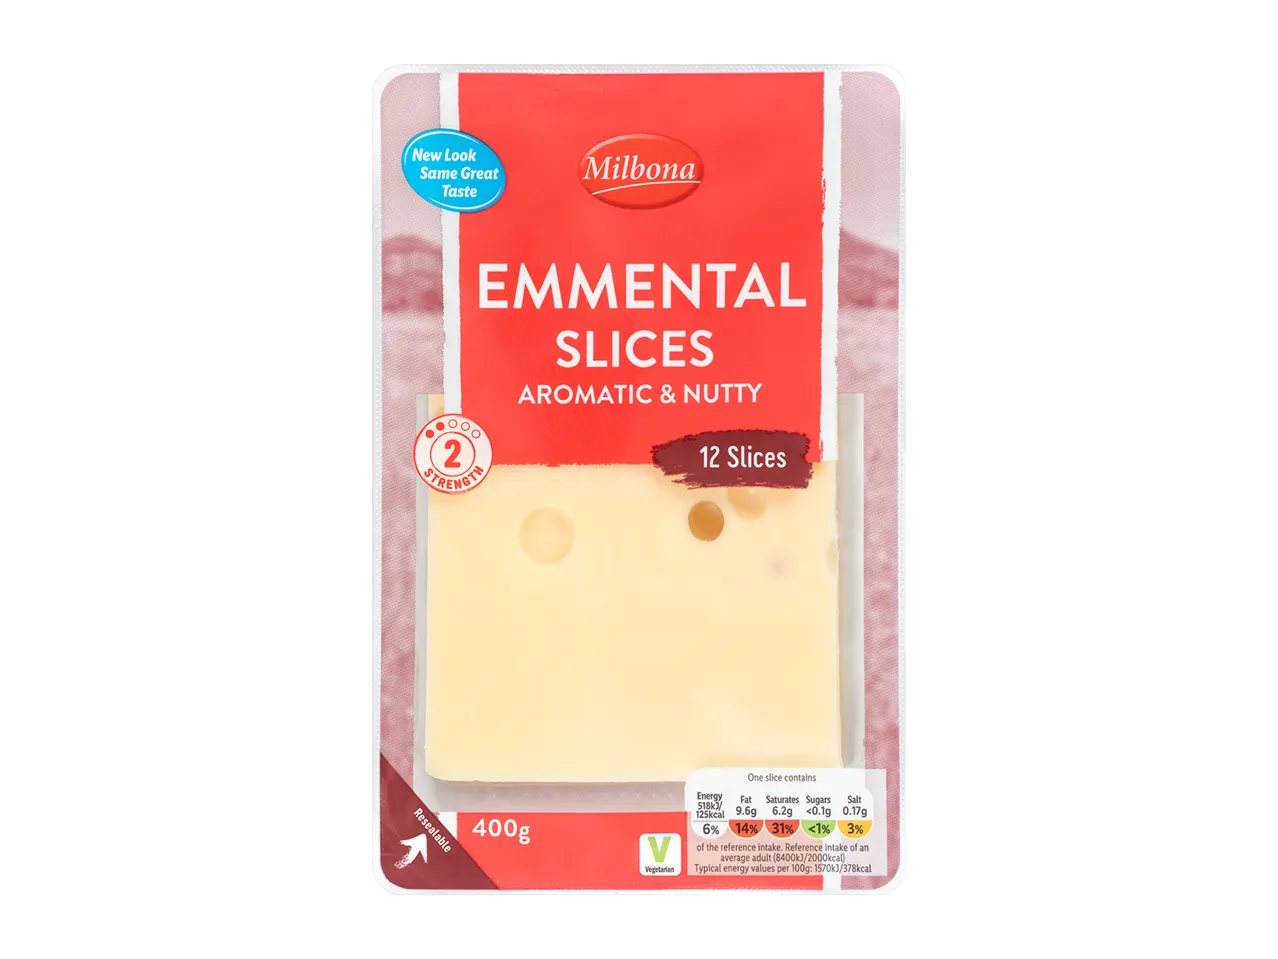 Go to full screen view: Milbona Emmental Slices - Image 1